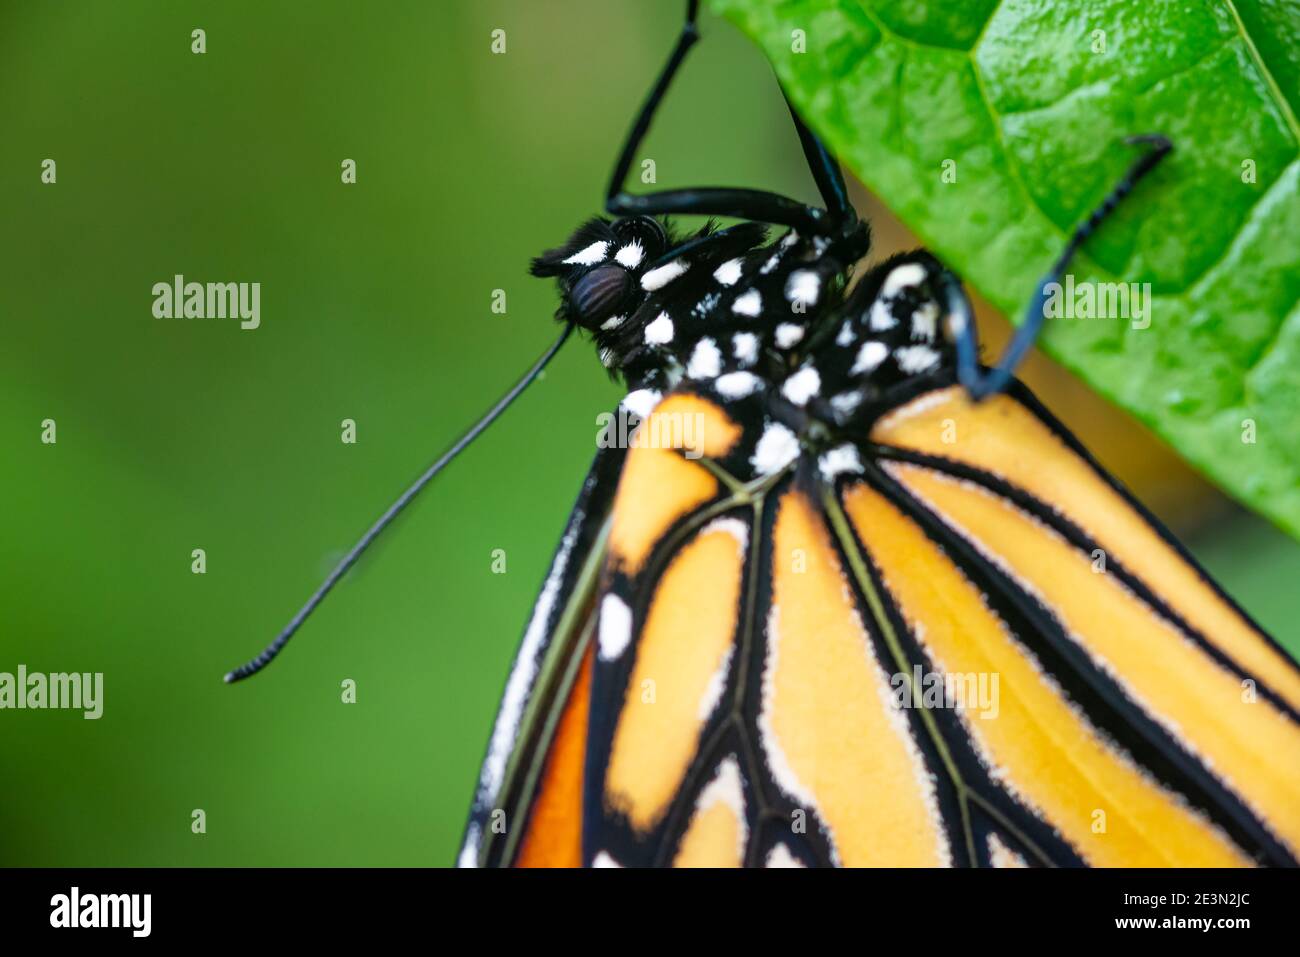 Macro detail of monarch butterfly on leaf, selective focus on head Stock Photo